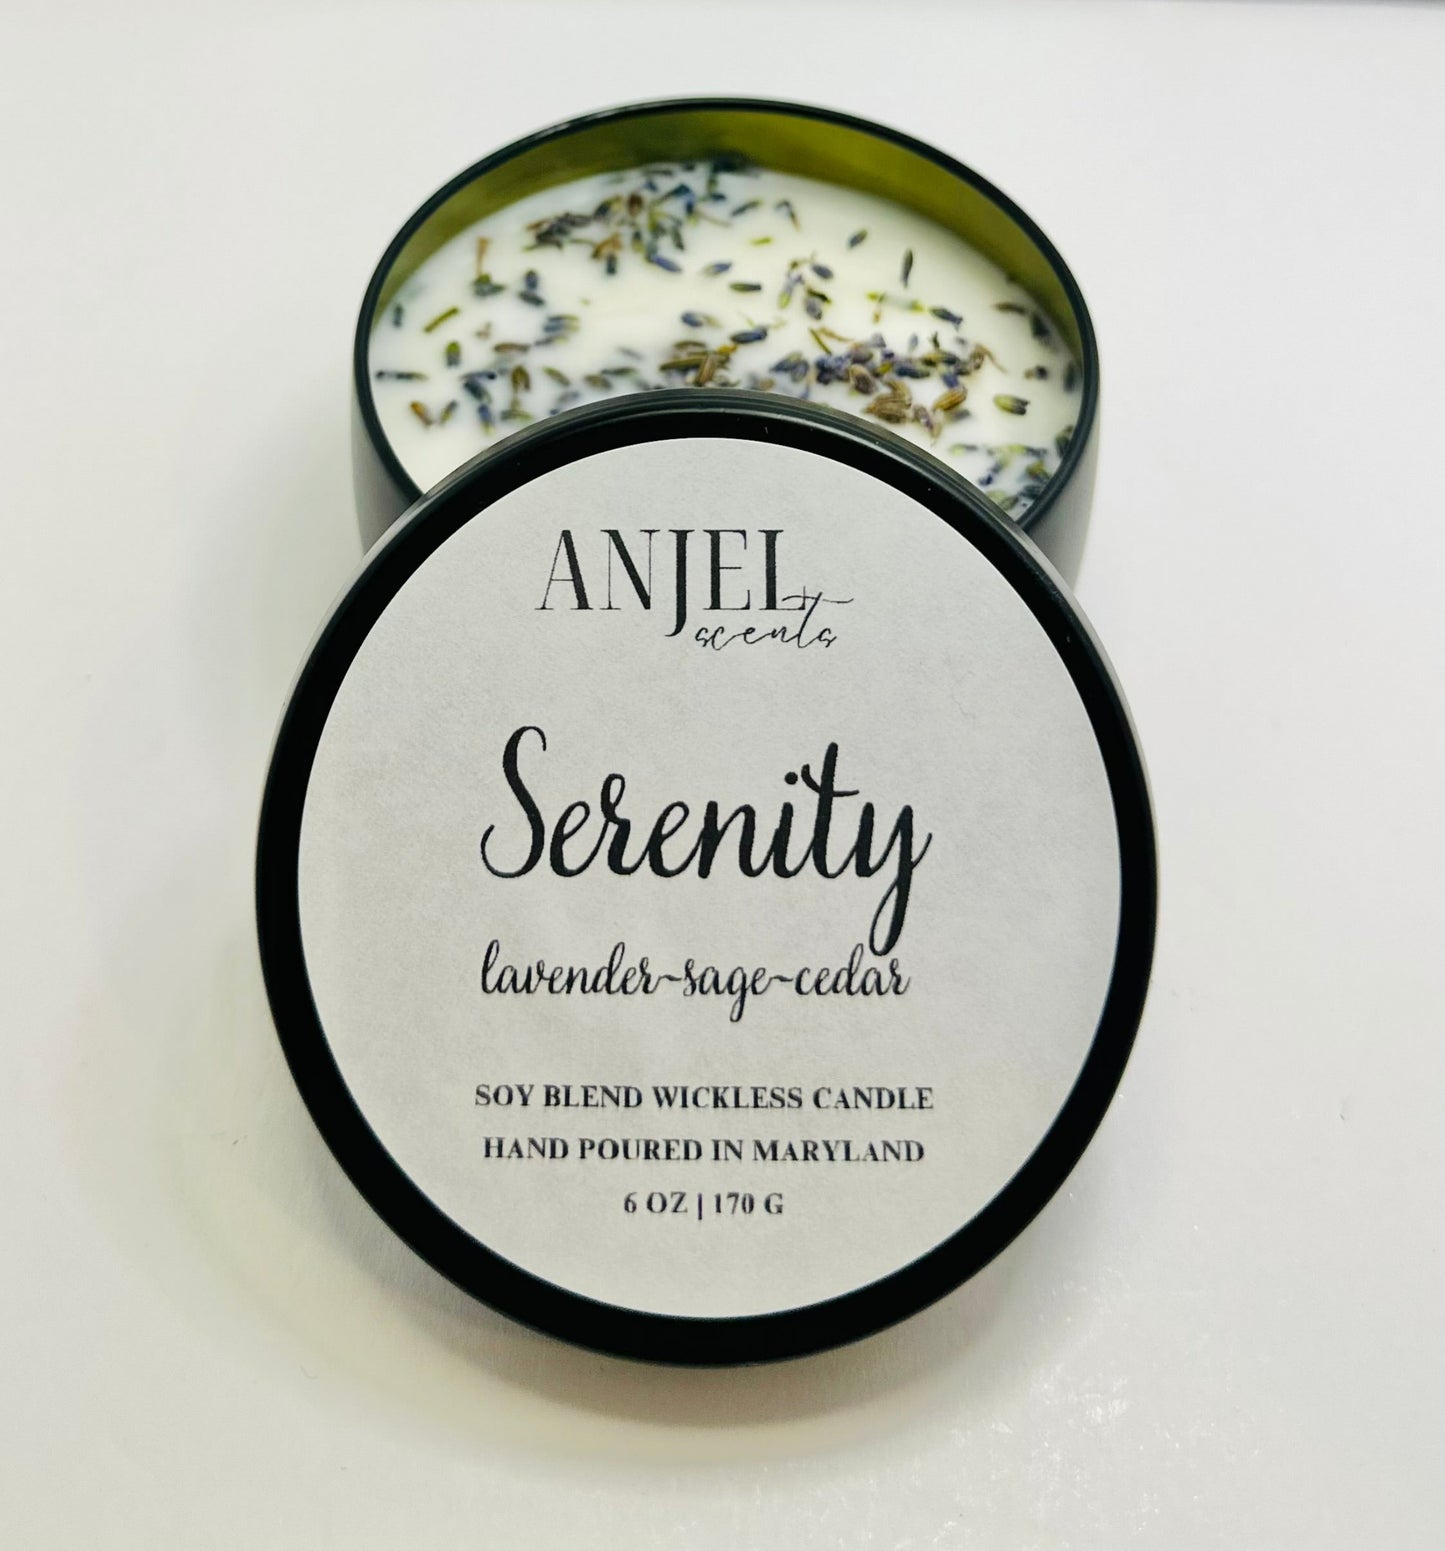 Serenity Wickless Candle Tin